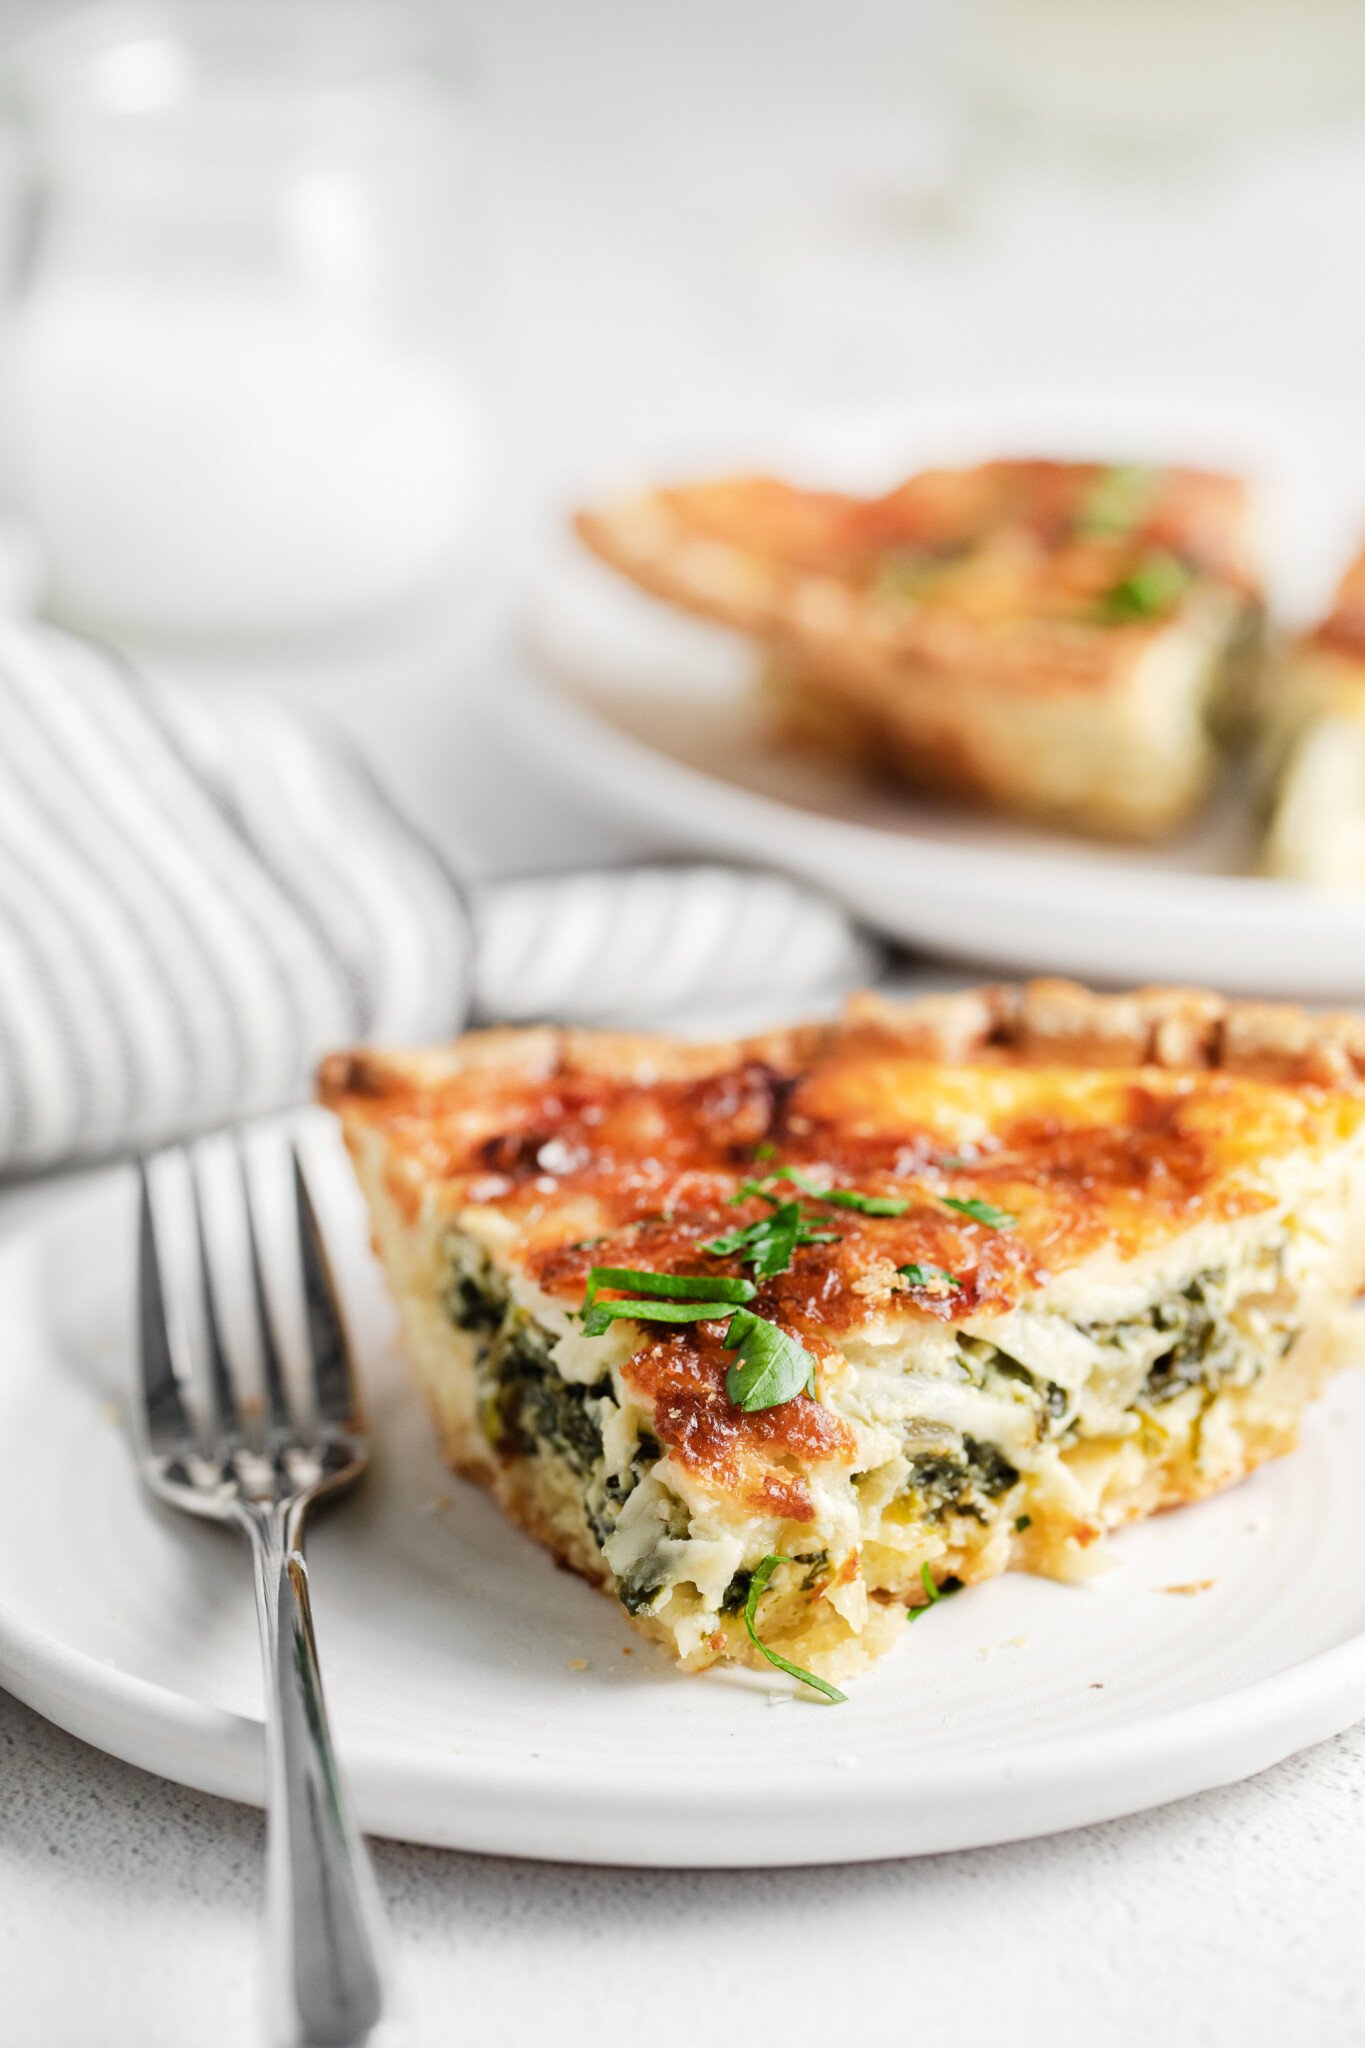 Easy Spinach Quiche (ready in under 1 hour!) - Fit Foodie Finds